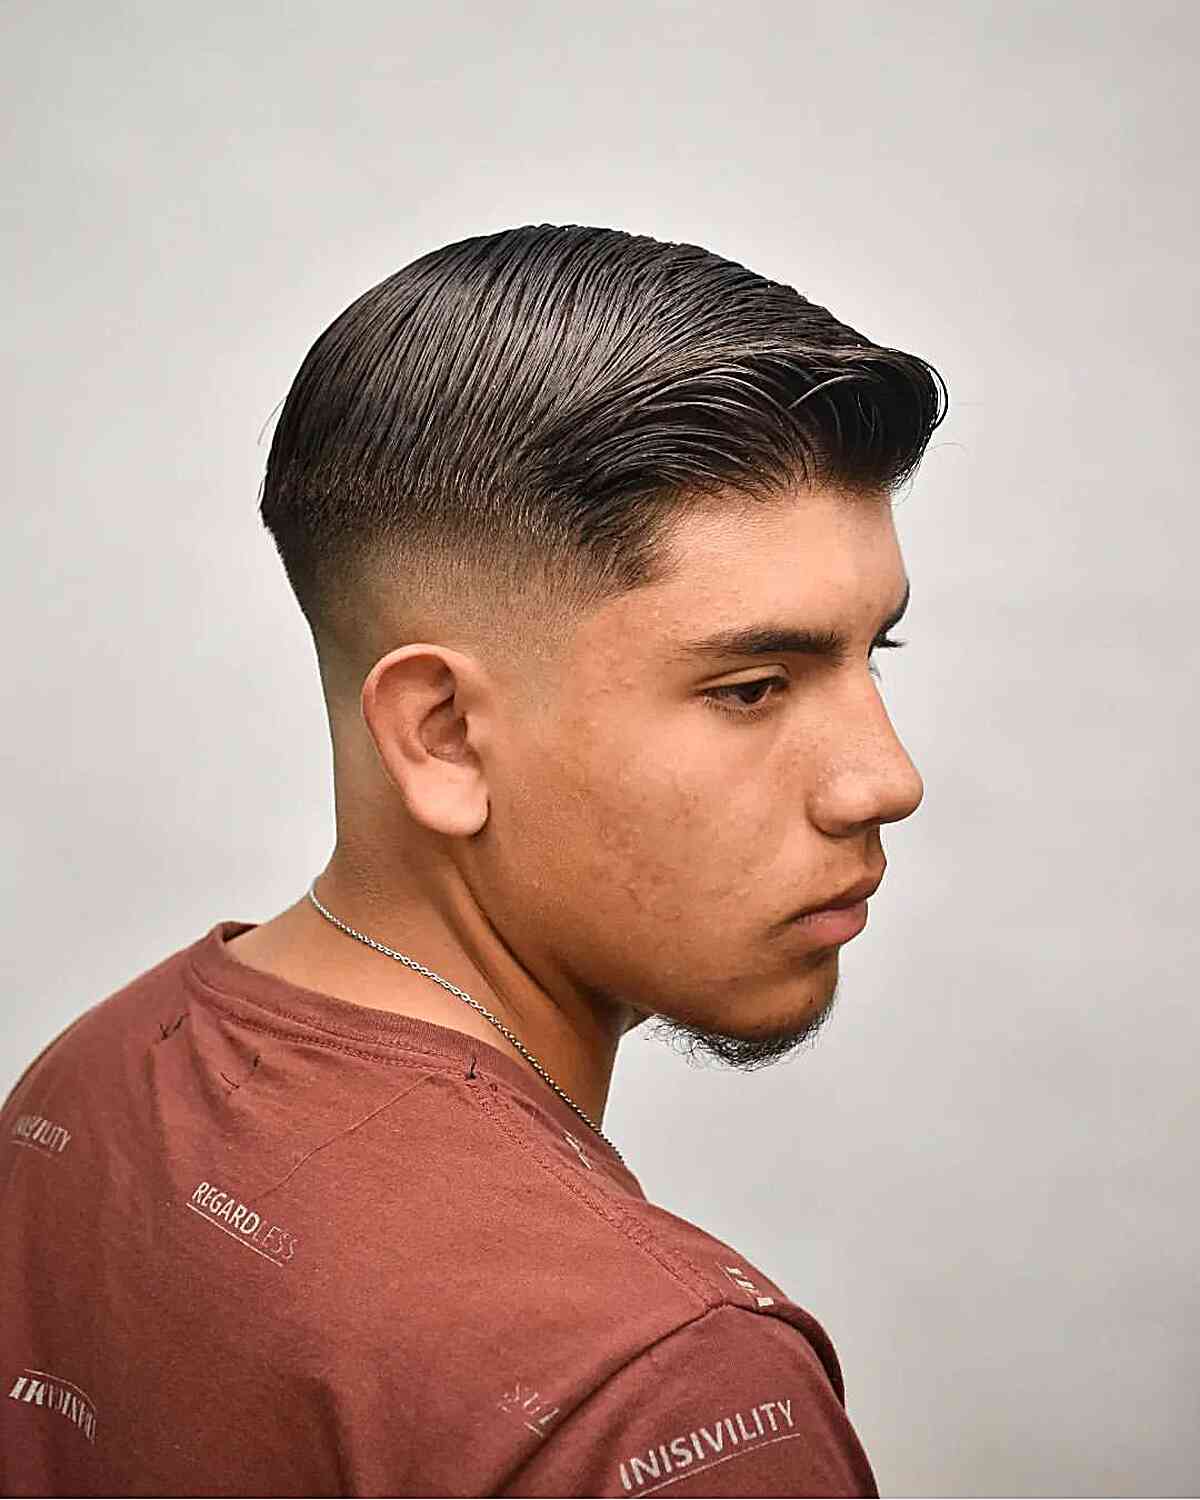 5 Classic, Simple and Low Maintenance Haircuts for Men - When choosing a  hairstyle, you want… | Mens hairstyles thick hair, Low maintenance haircut,  Classic haircut